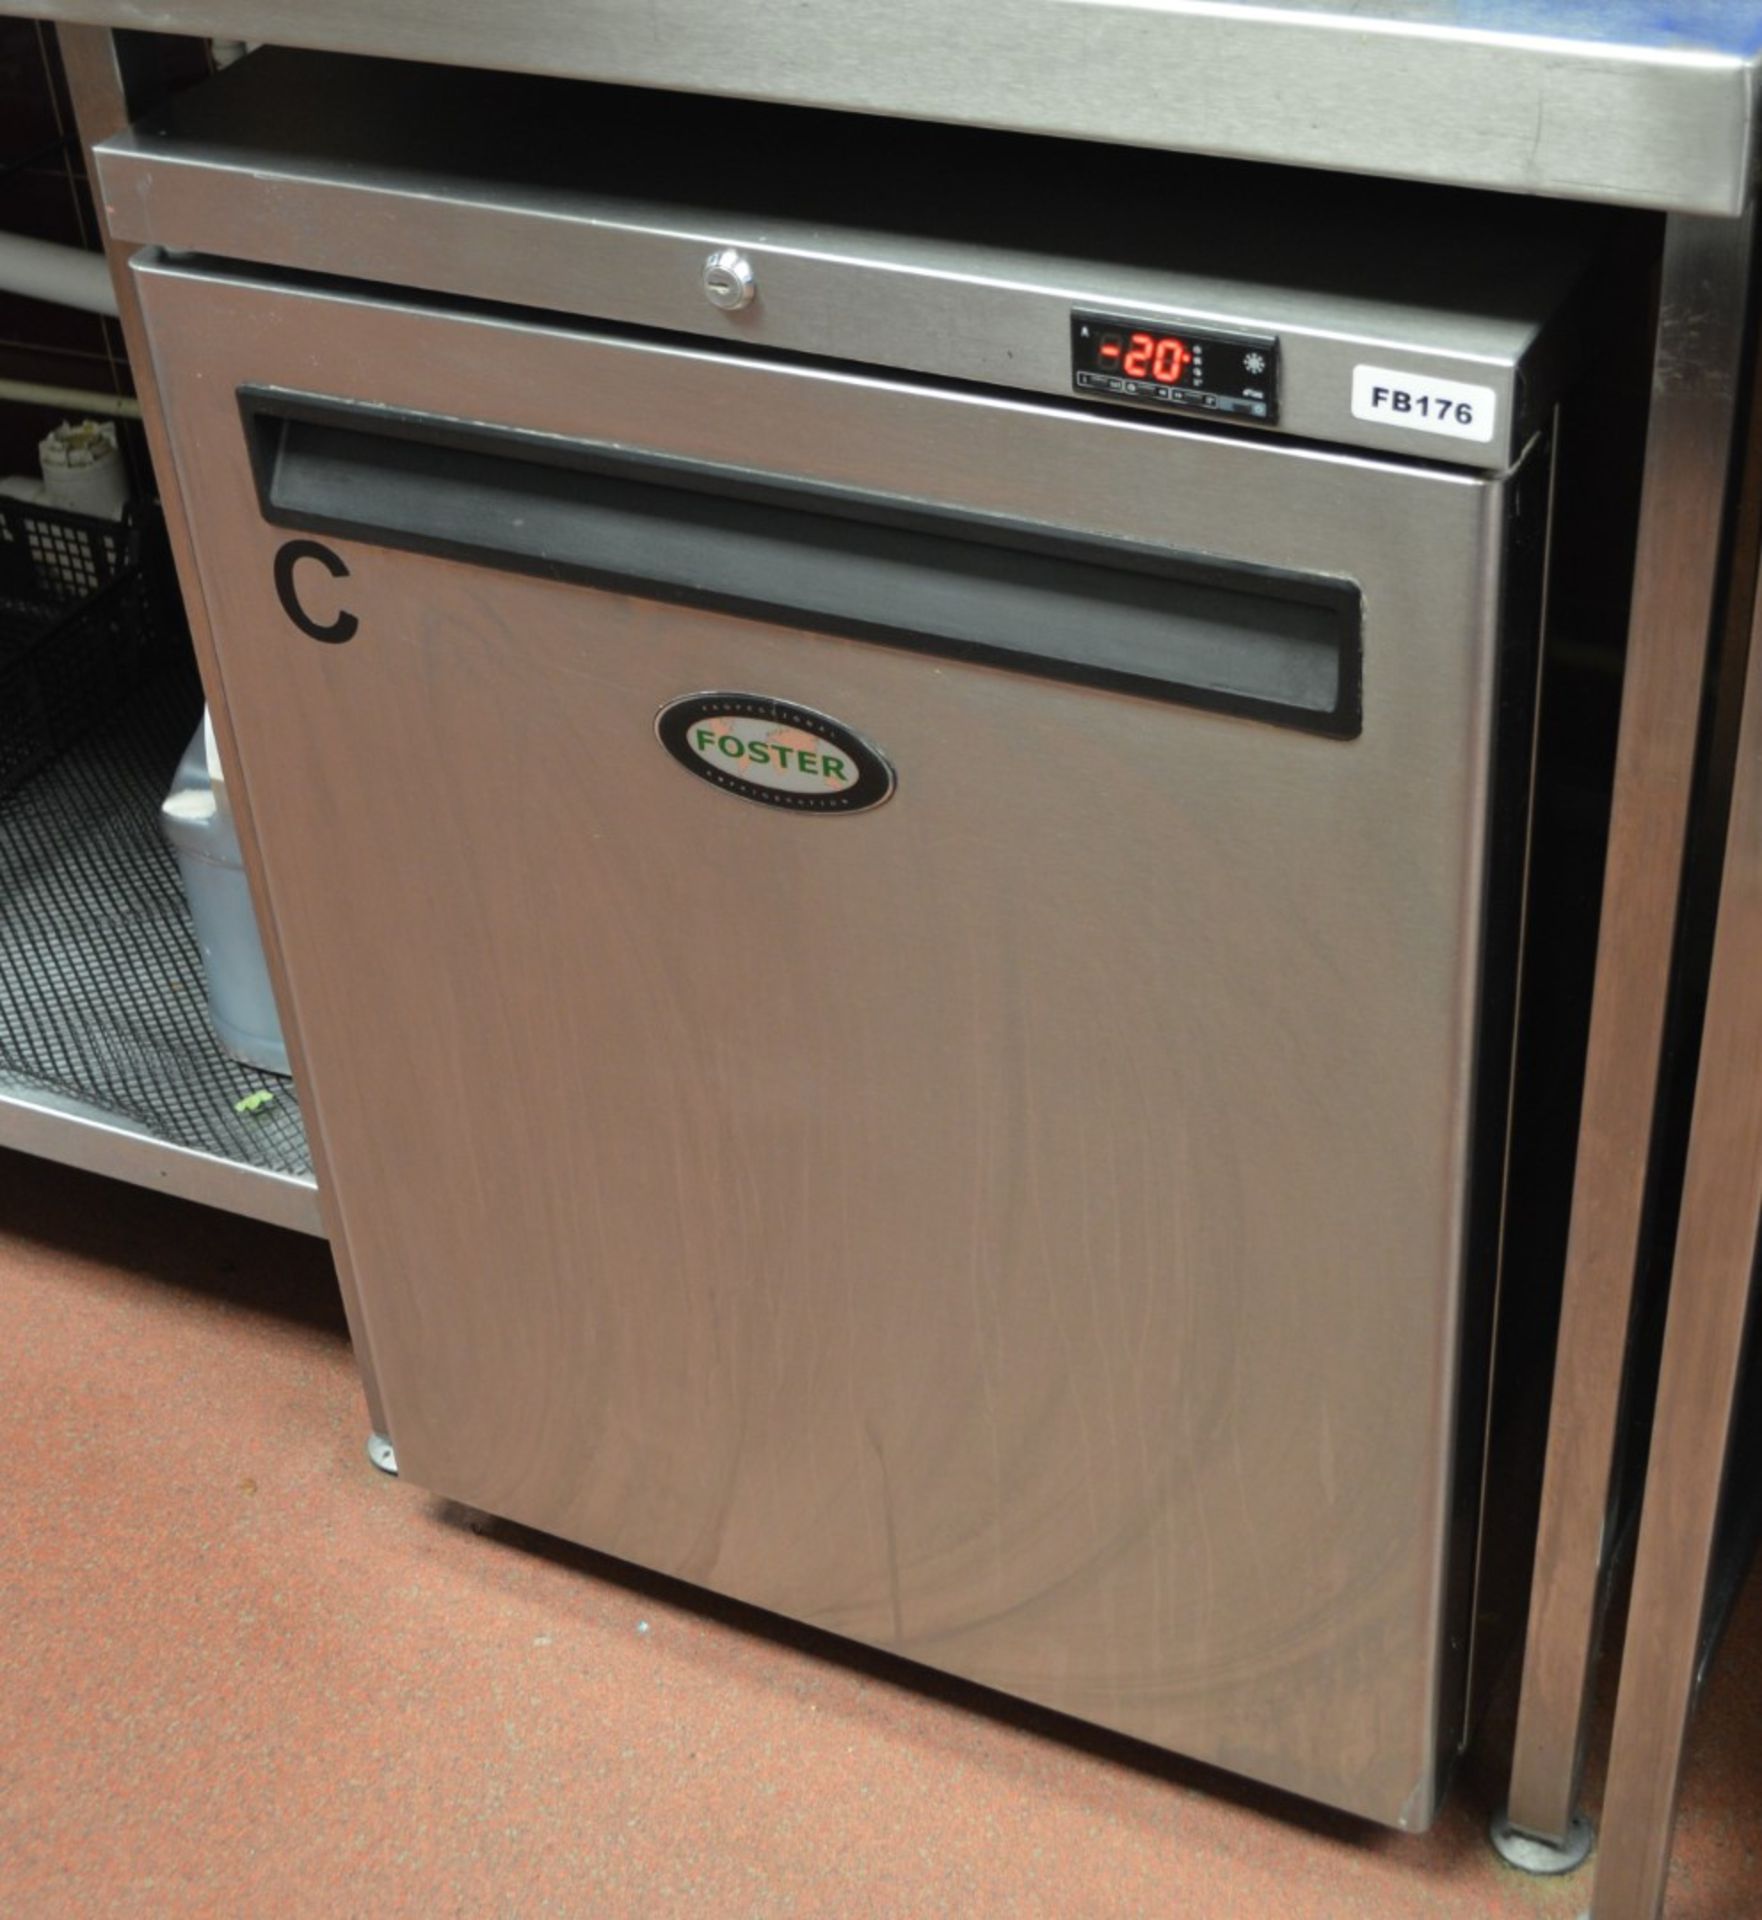 1 x Foster Undercounter Single Door Freezer With Stainless Steel Finish - Model LR150-A - H65 x